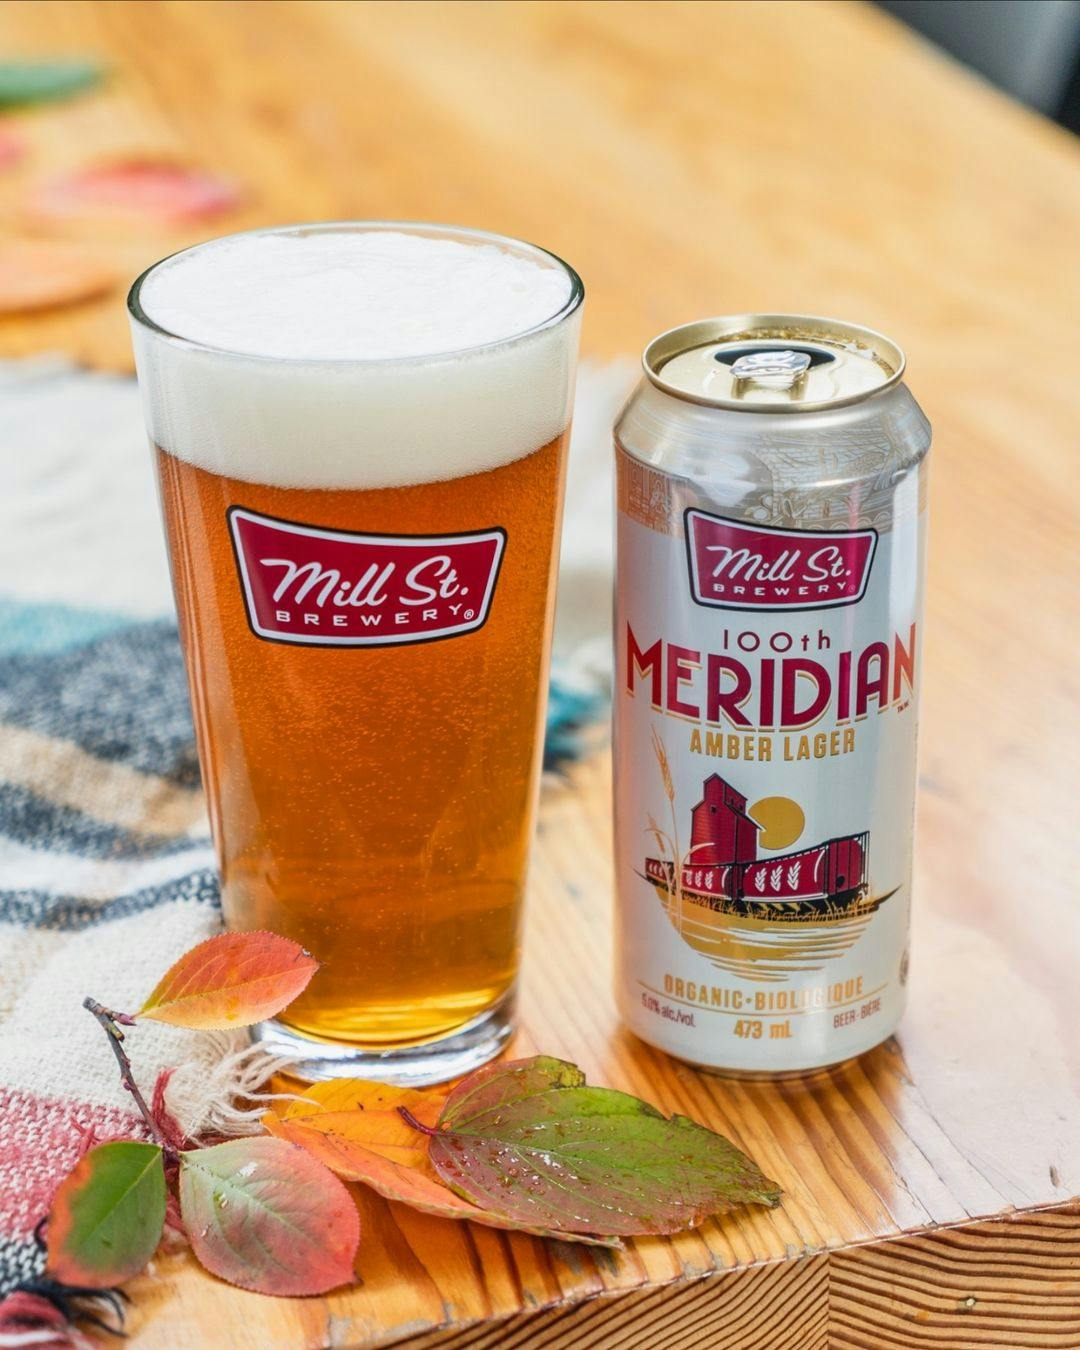 100th Meridian Amber Lager, Mill Street Brewery